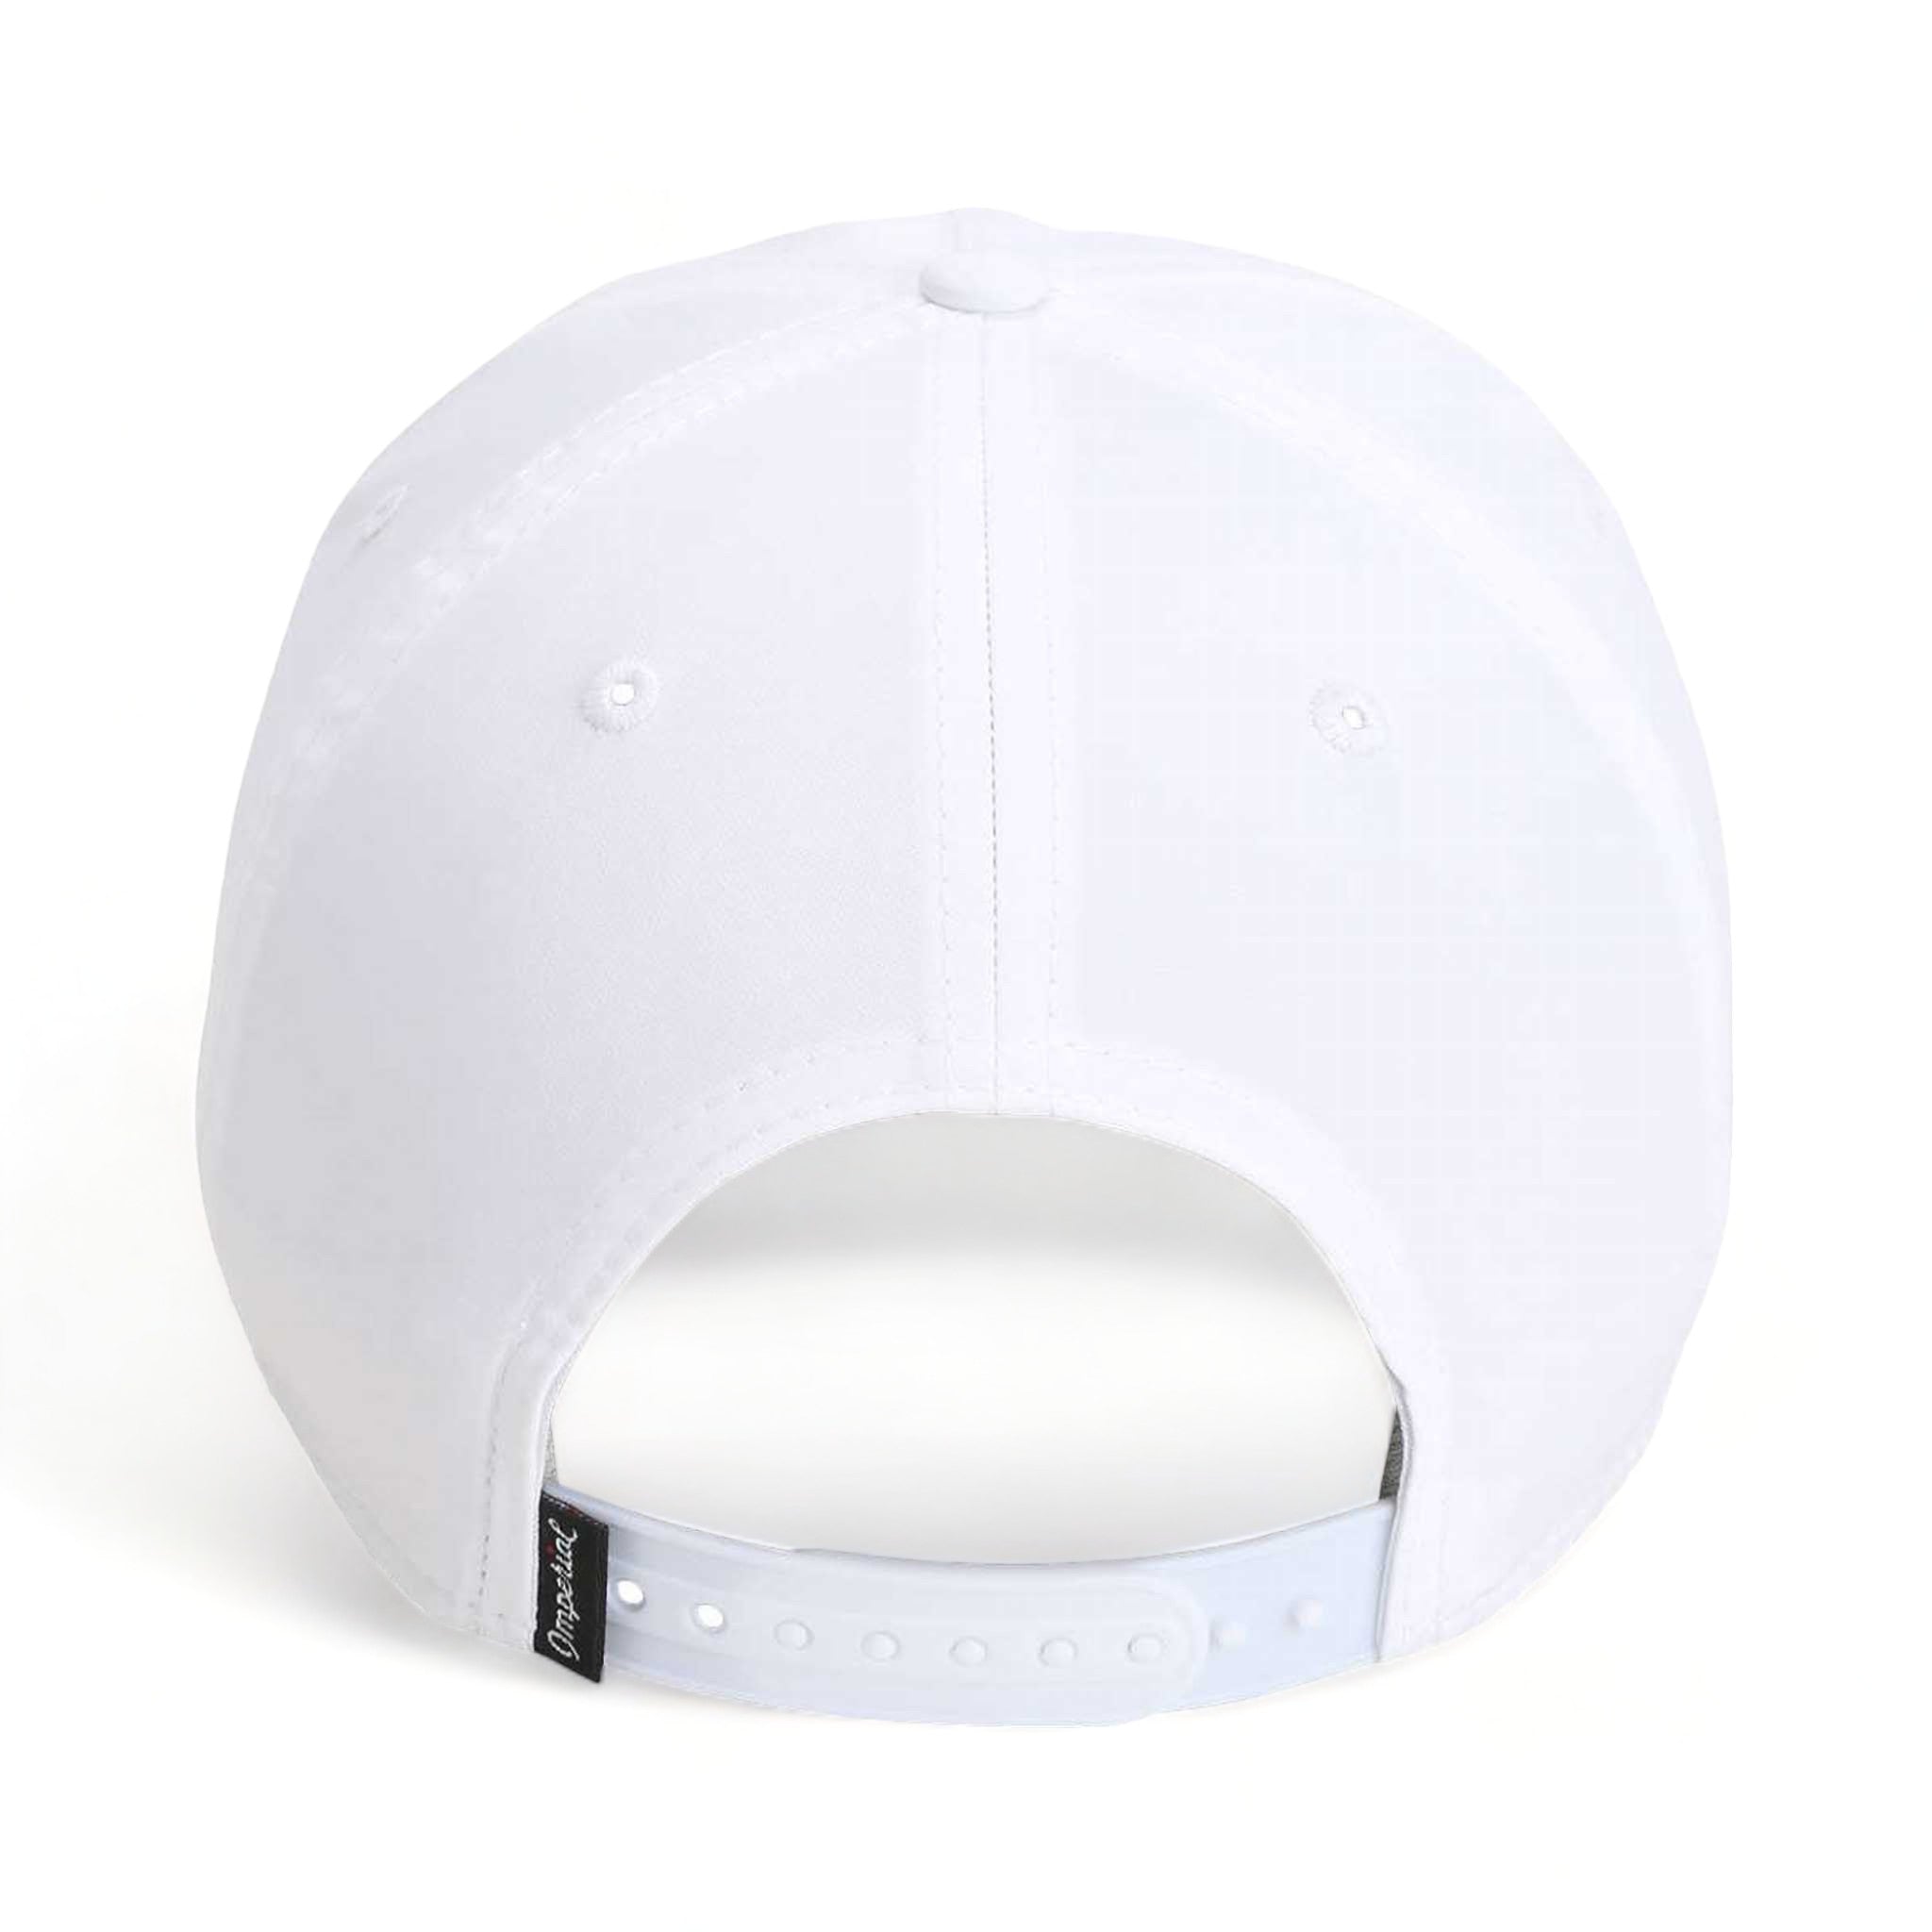 Back view of Imperial 5054 custom hat in white, navy and neon